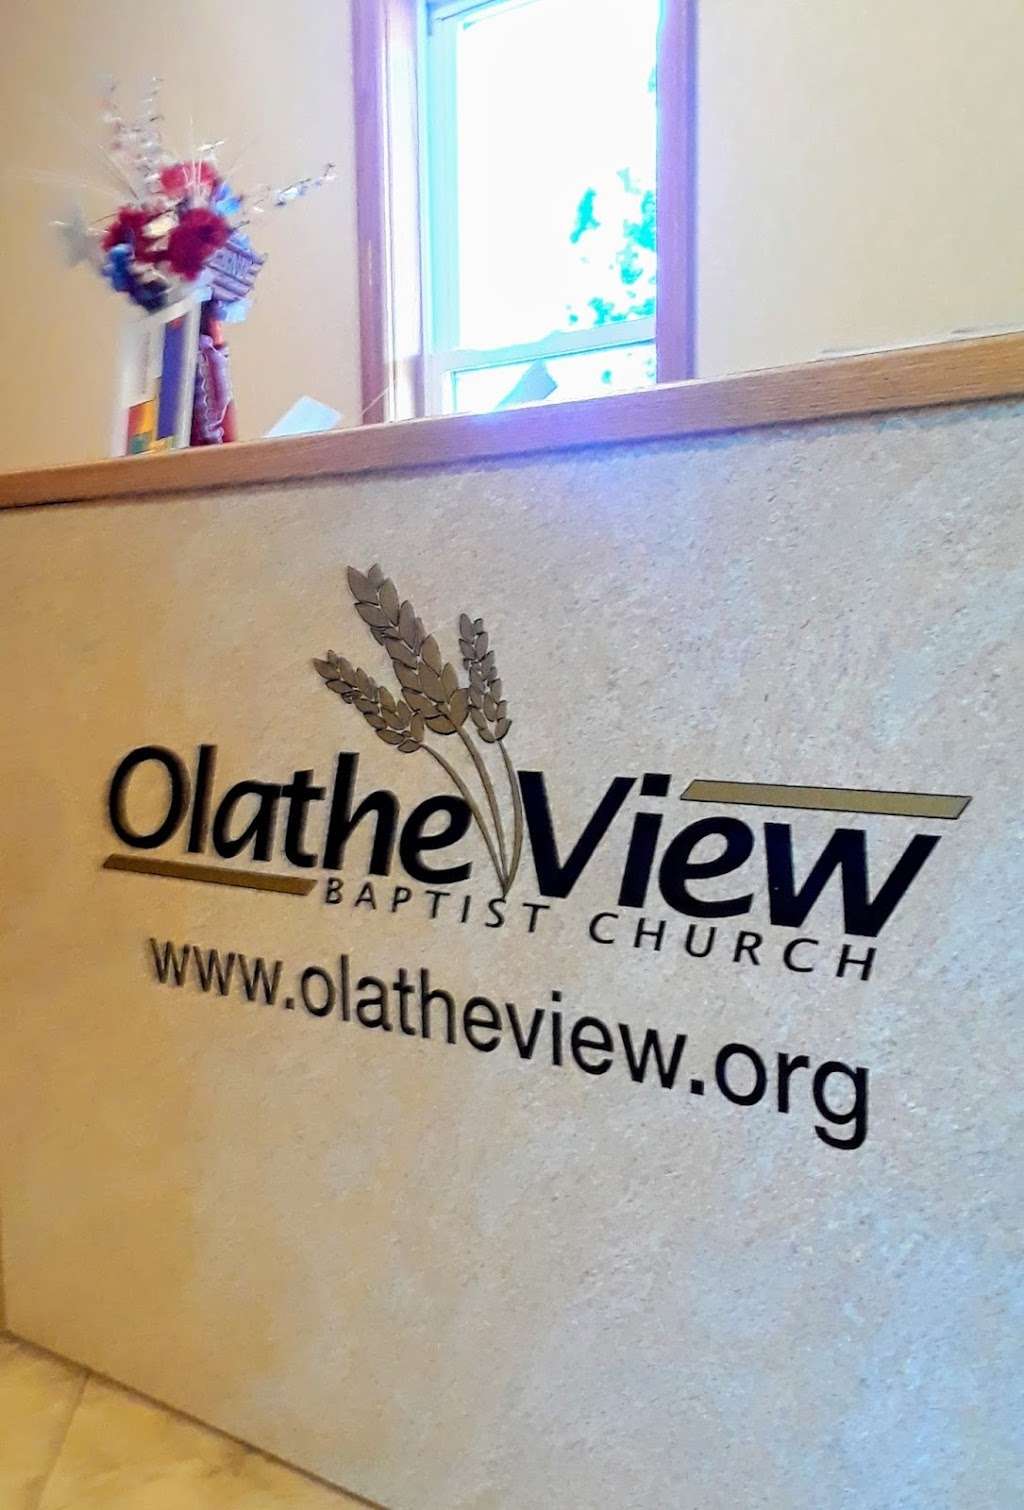 visit clearview church olathe